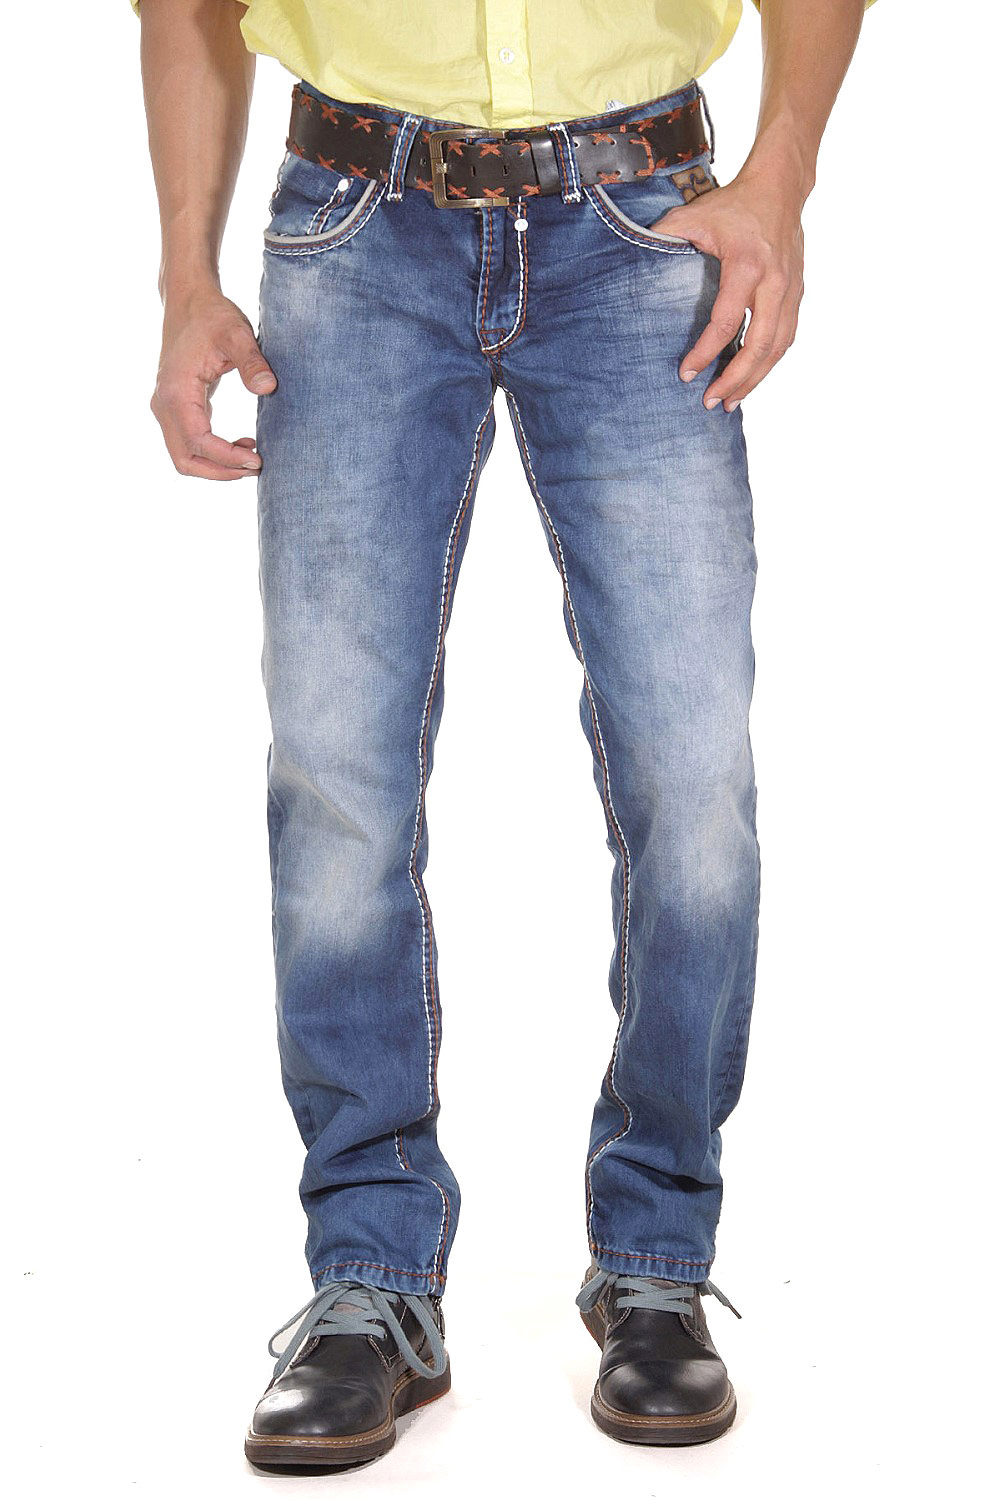 R-NEAL stretchjeans slim fit at oboy.com